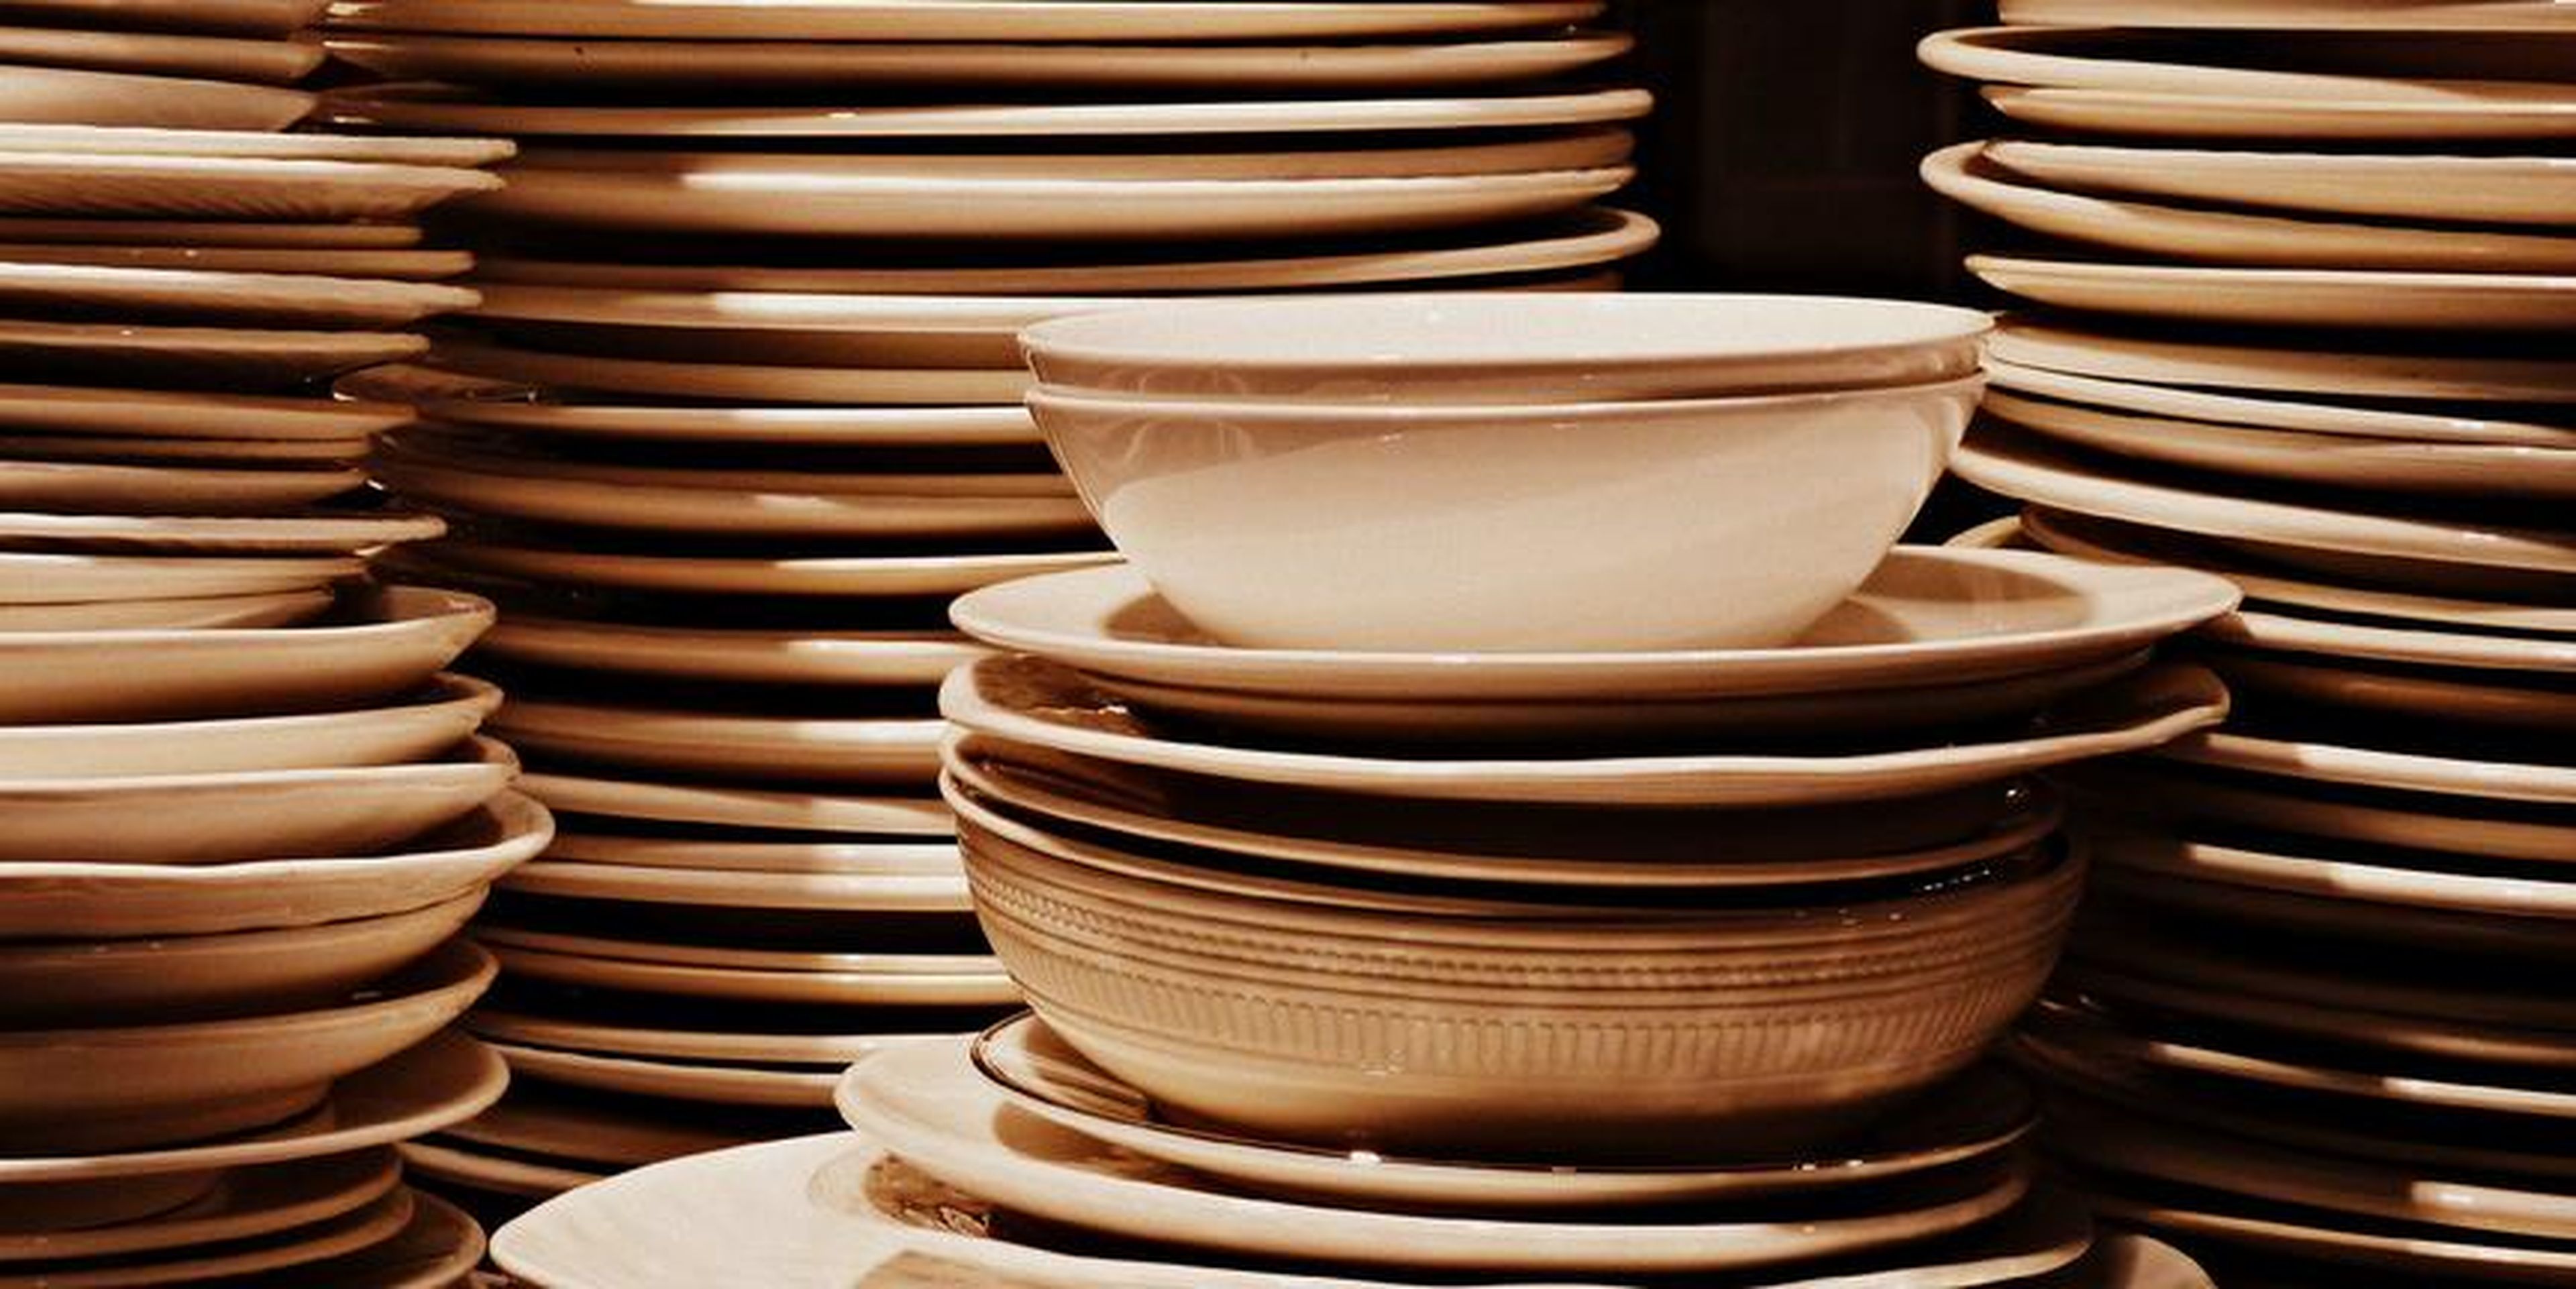 1. An avalanche of dishes and food containers